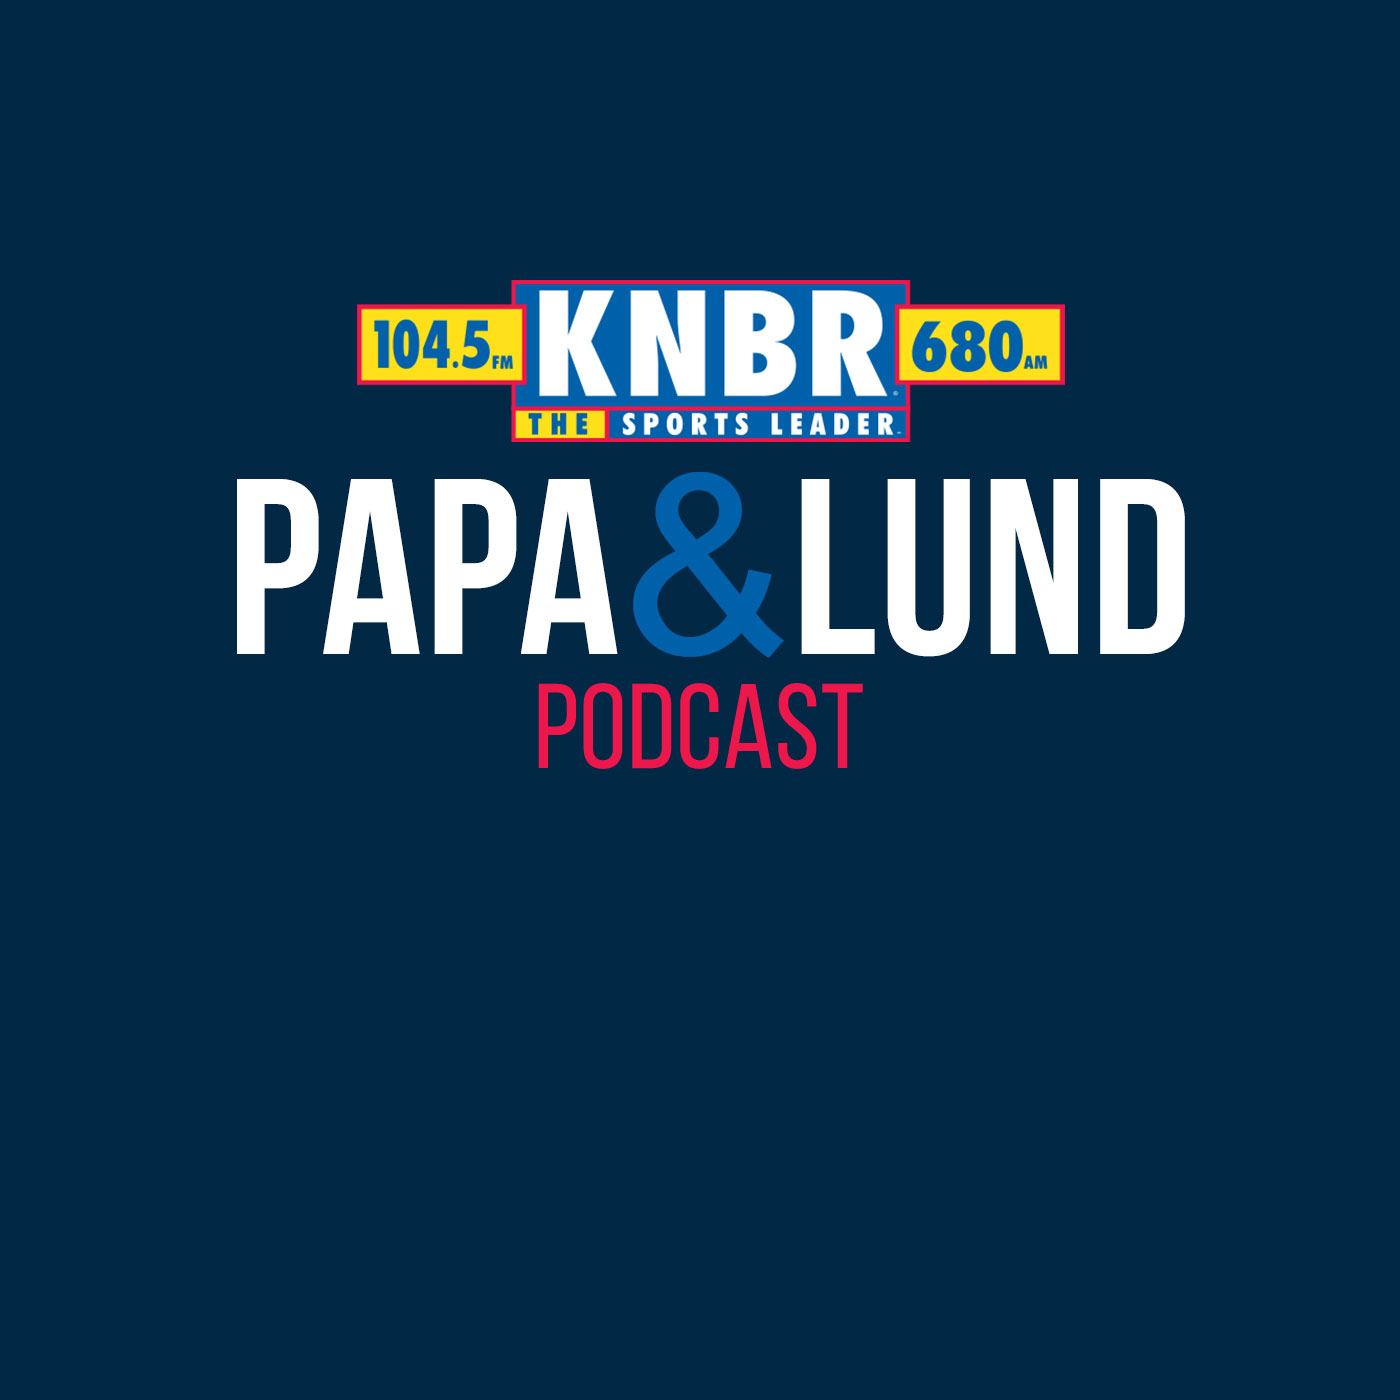 6-28 Shawn Estes joins Papa & Lund to discuss the disappointing weekend series against the Reds as the Giants attempt to turn the page and finish the homestand strong